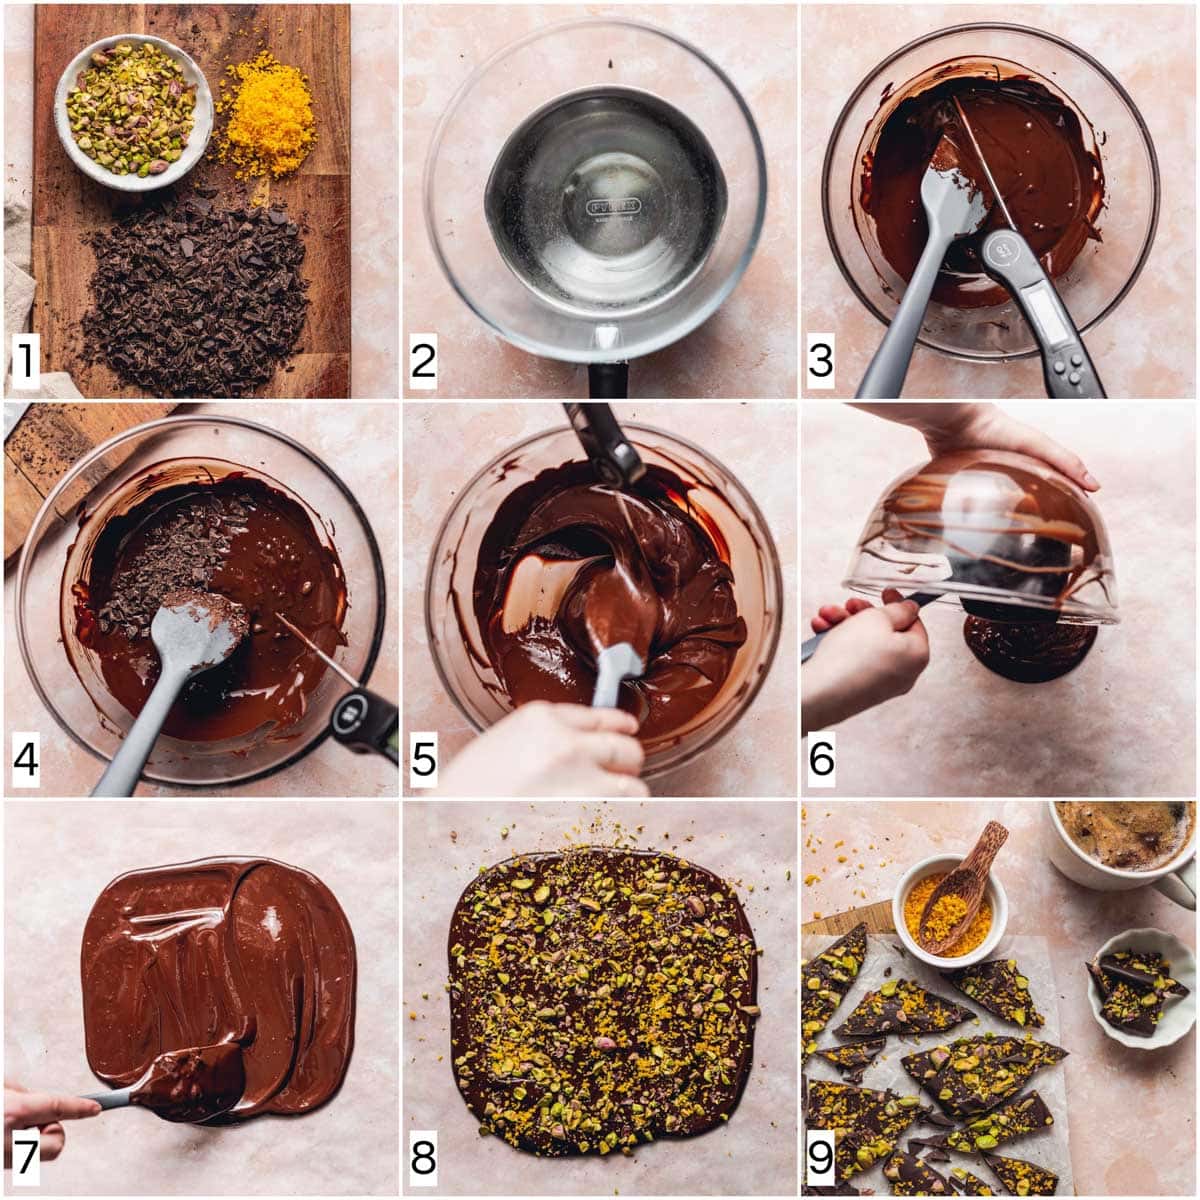 A collage of 9 images showing different steps of tempering chocolate.